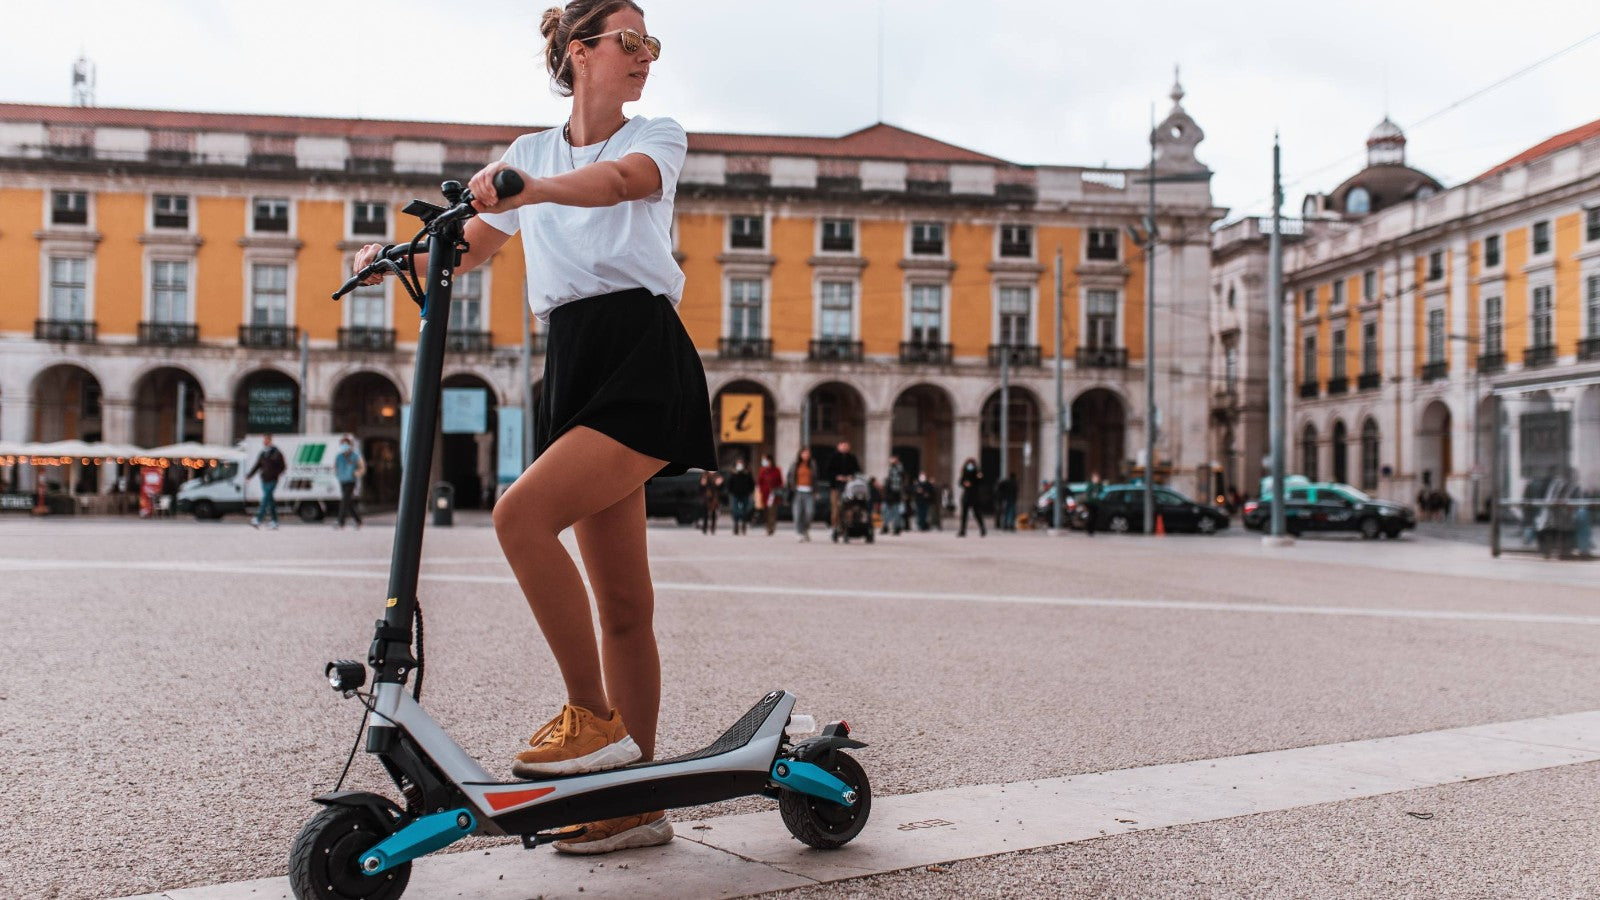 How Does Tire Pressure Affect Your Electric Scooter Range?